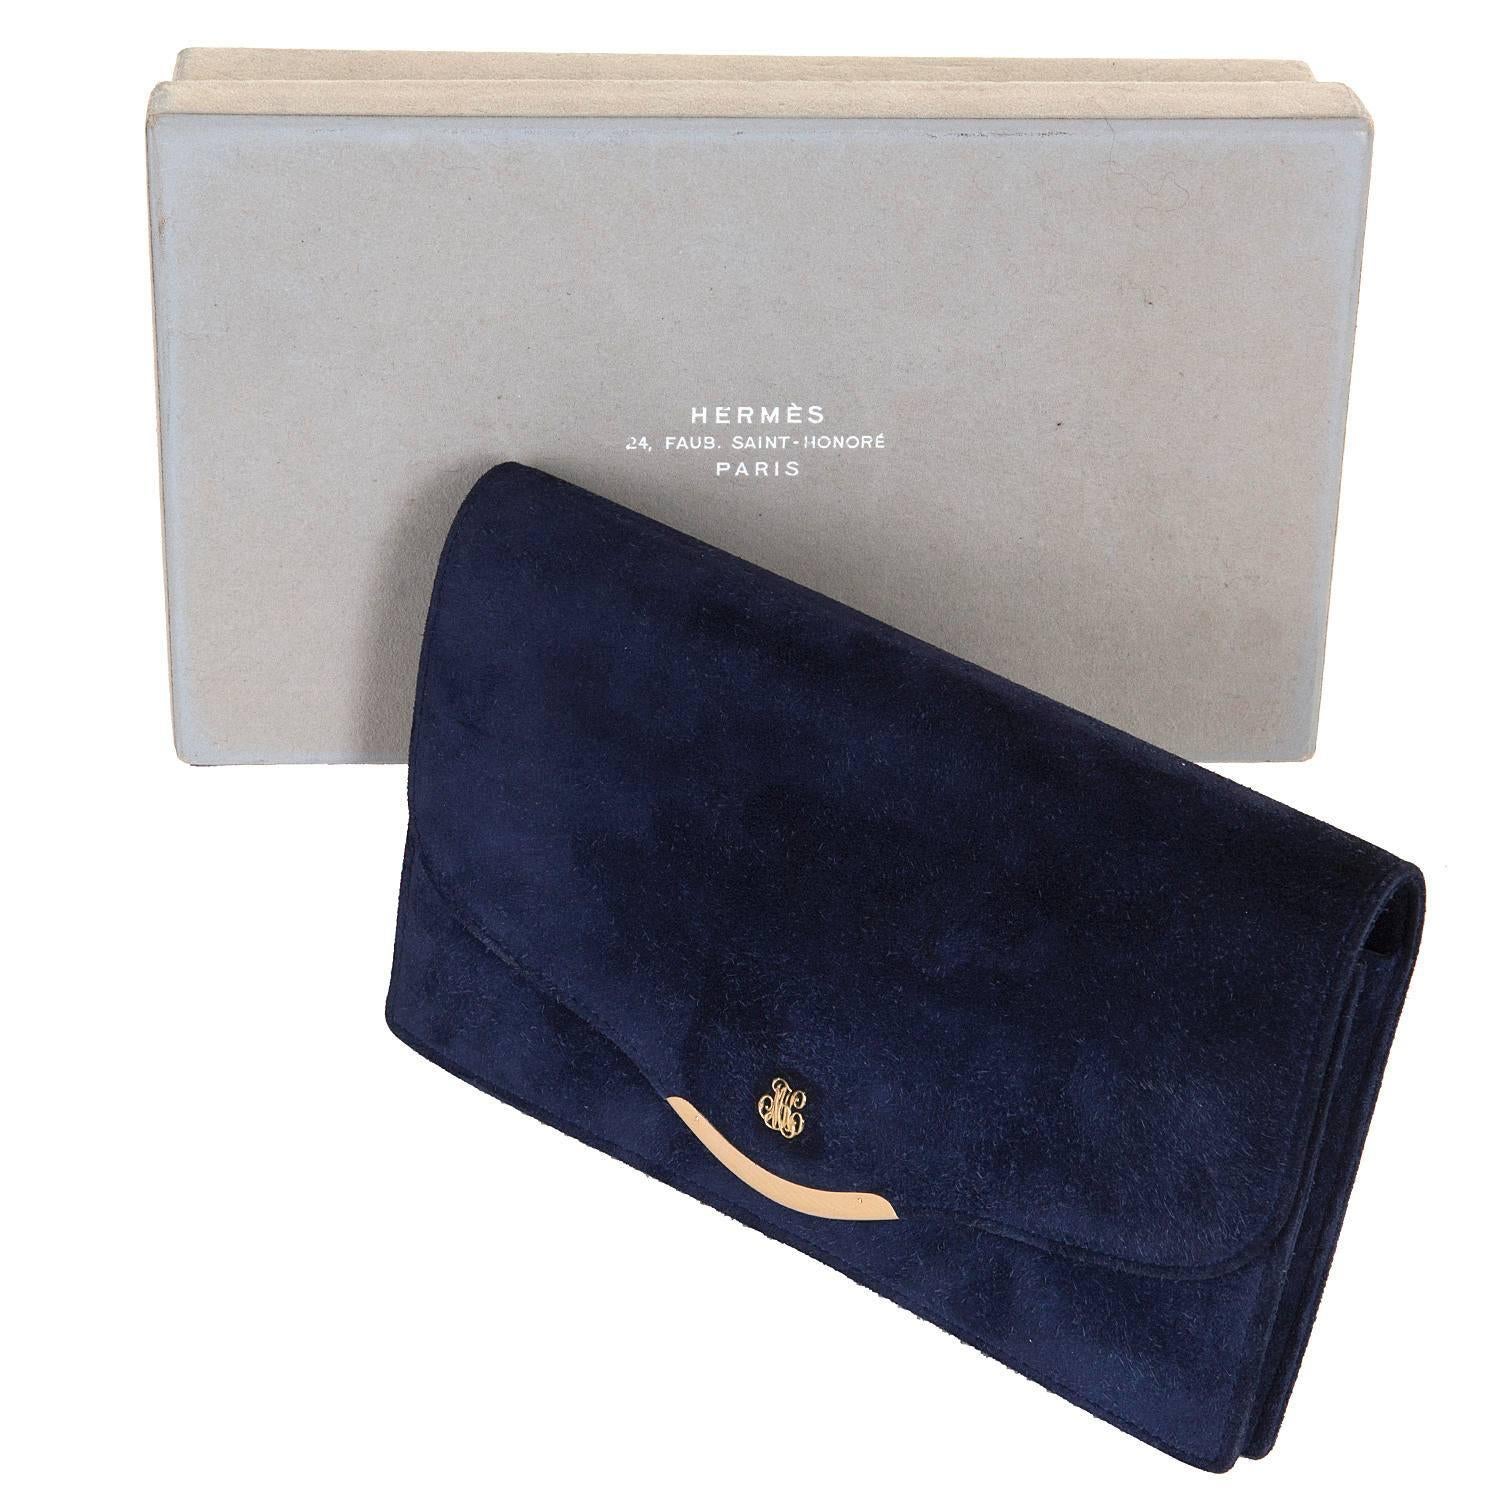 A Very Rare & Beautiful  Vintage Hermes Royal Blue 'Veau Doblis' (Suede) Clutch Bag with an 18 carat Gold Clasp. This special order bag is in pristine condition throughout with matching suede to the interior with two compartments, one fitted with a